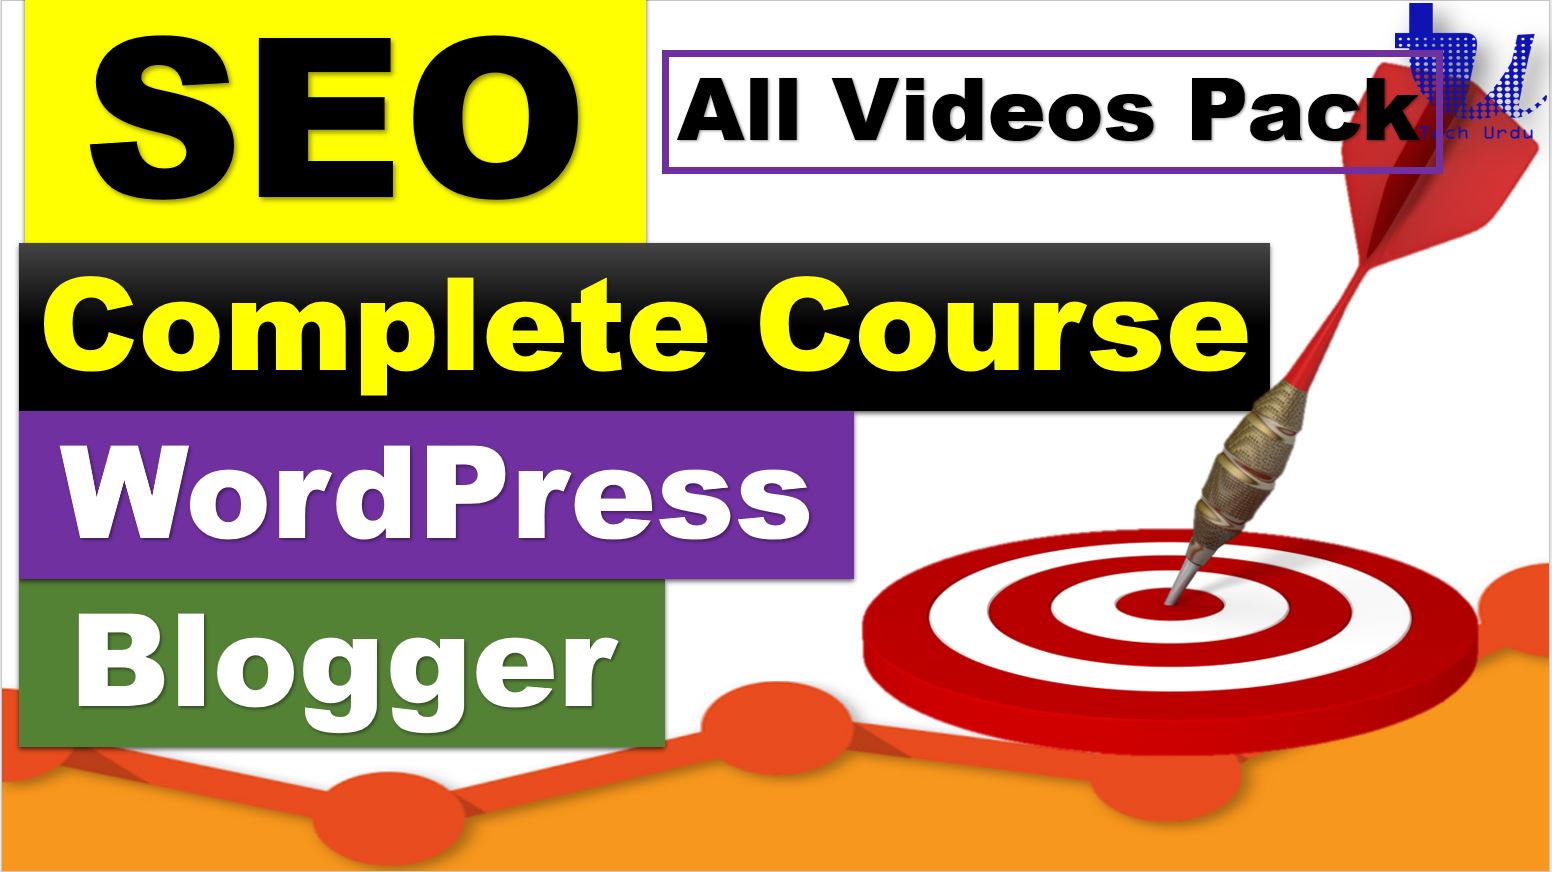 SEO Complete Course for WordPress and Blogger (FREE)